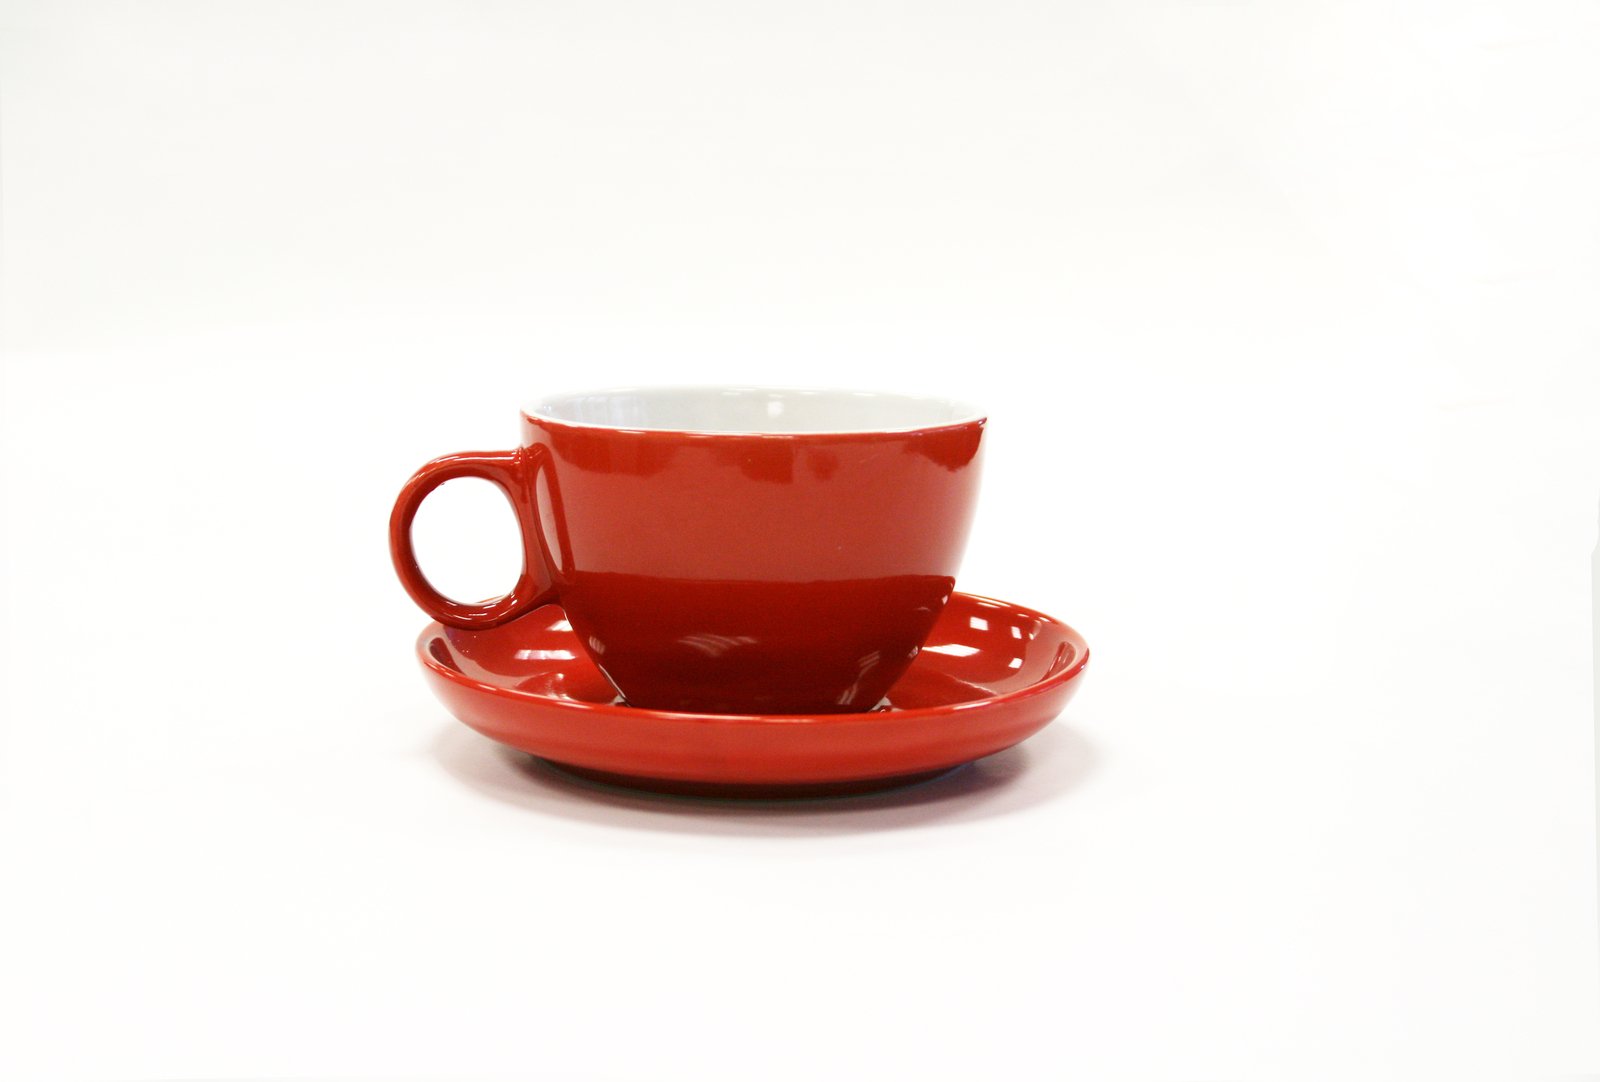 a red cup and saucer with an open plate on top